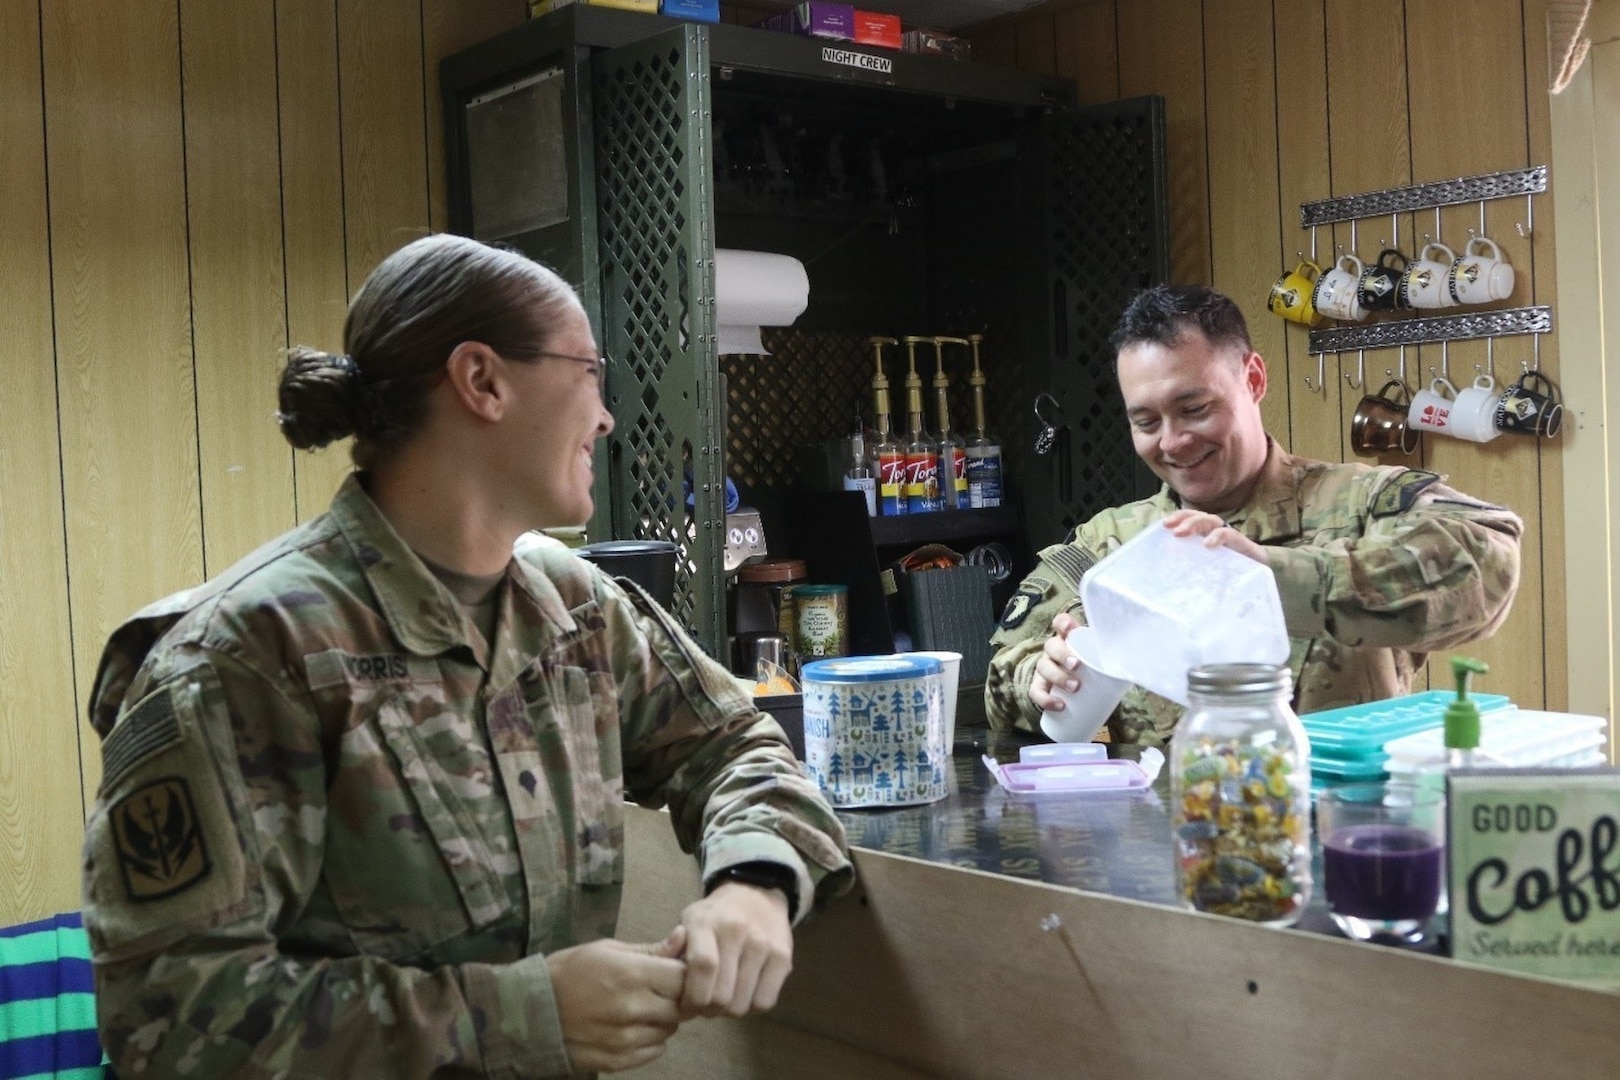 U.S. Army Chief Warrant Officer 2 Ryan Amato assigned to 1st Battalion, 189th Aviation Regiment, prepares an iced coffee for Spc Sarah Morris at the Dustoff Coffee shop at Camp Taji, Iraq May 18, 2018.